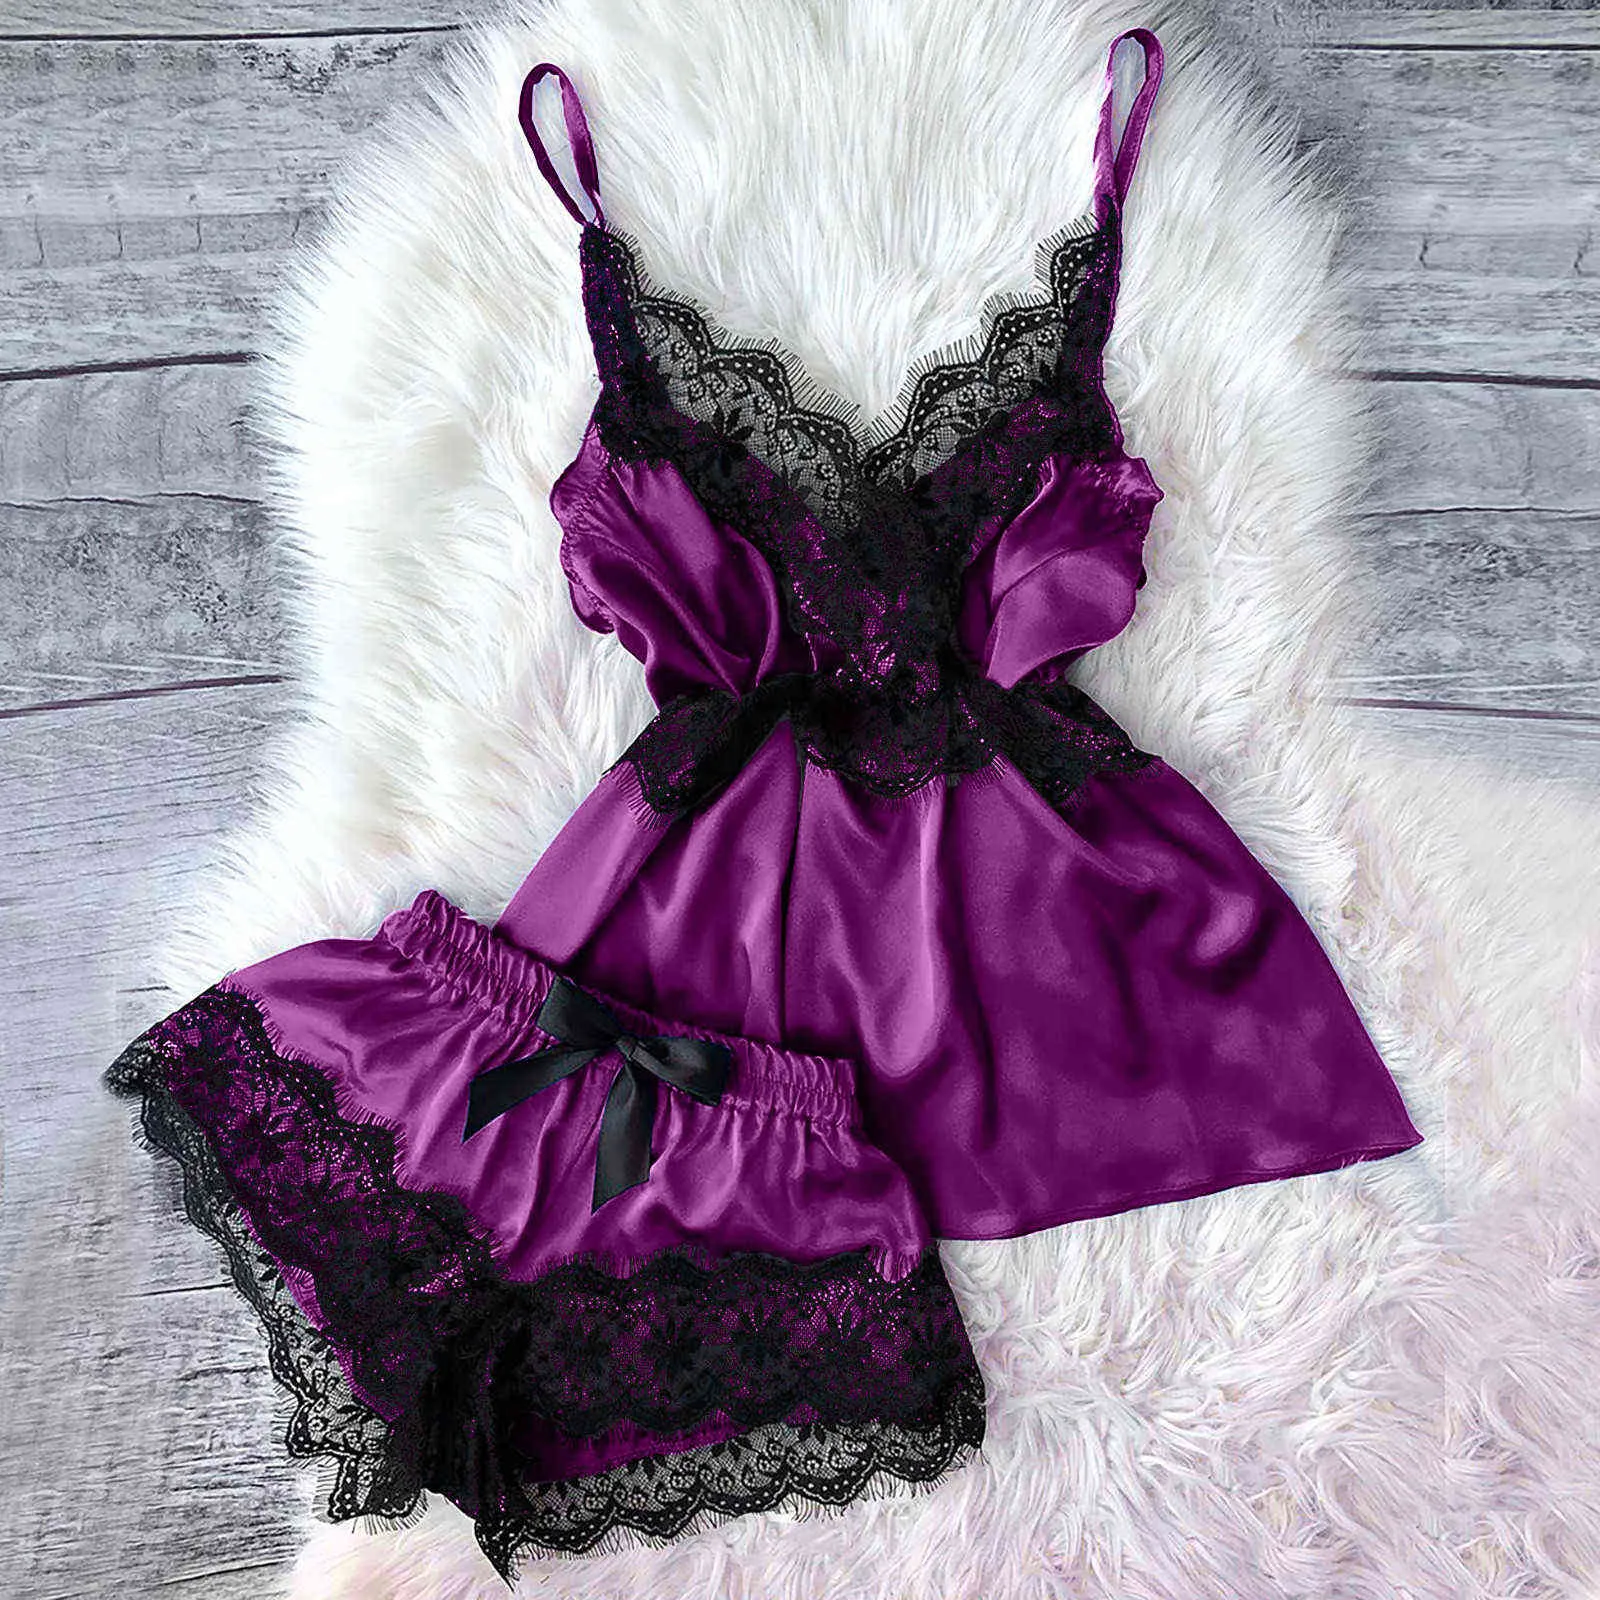 Sexy Lace Pyjama Set For Women Includes Top And Satin Shorts Babydoll  Pajamas And Homewear Lingerie L231116 From Sihuai03, $7.32